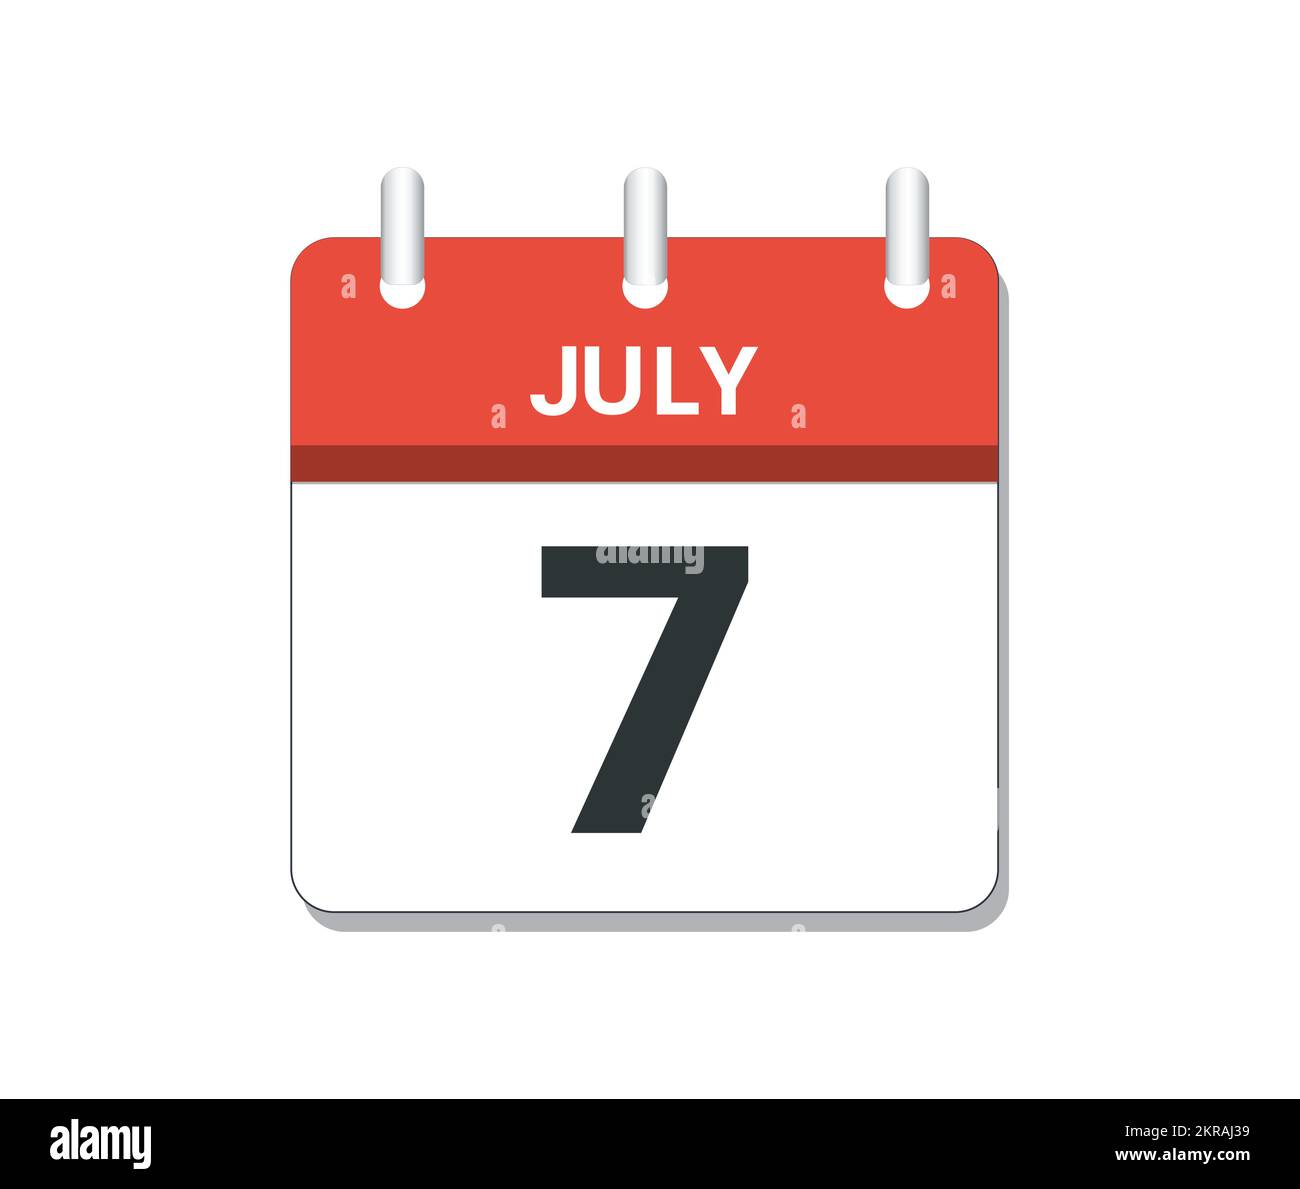 July 7th calendar icon vector. Concept of schedule, business and tasks Stock Vector